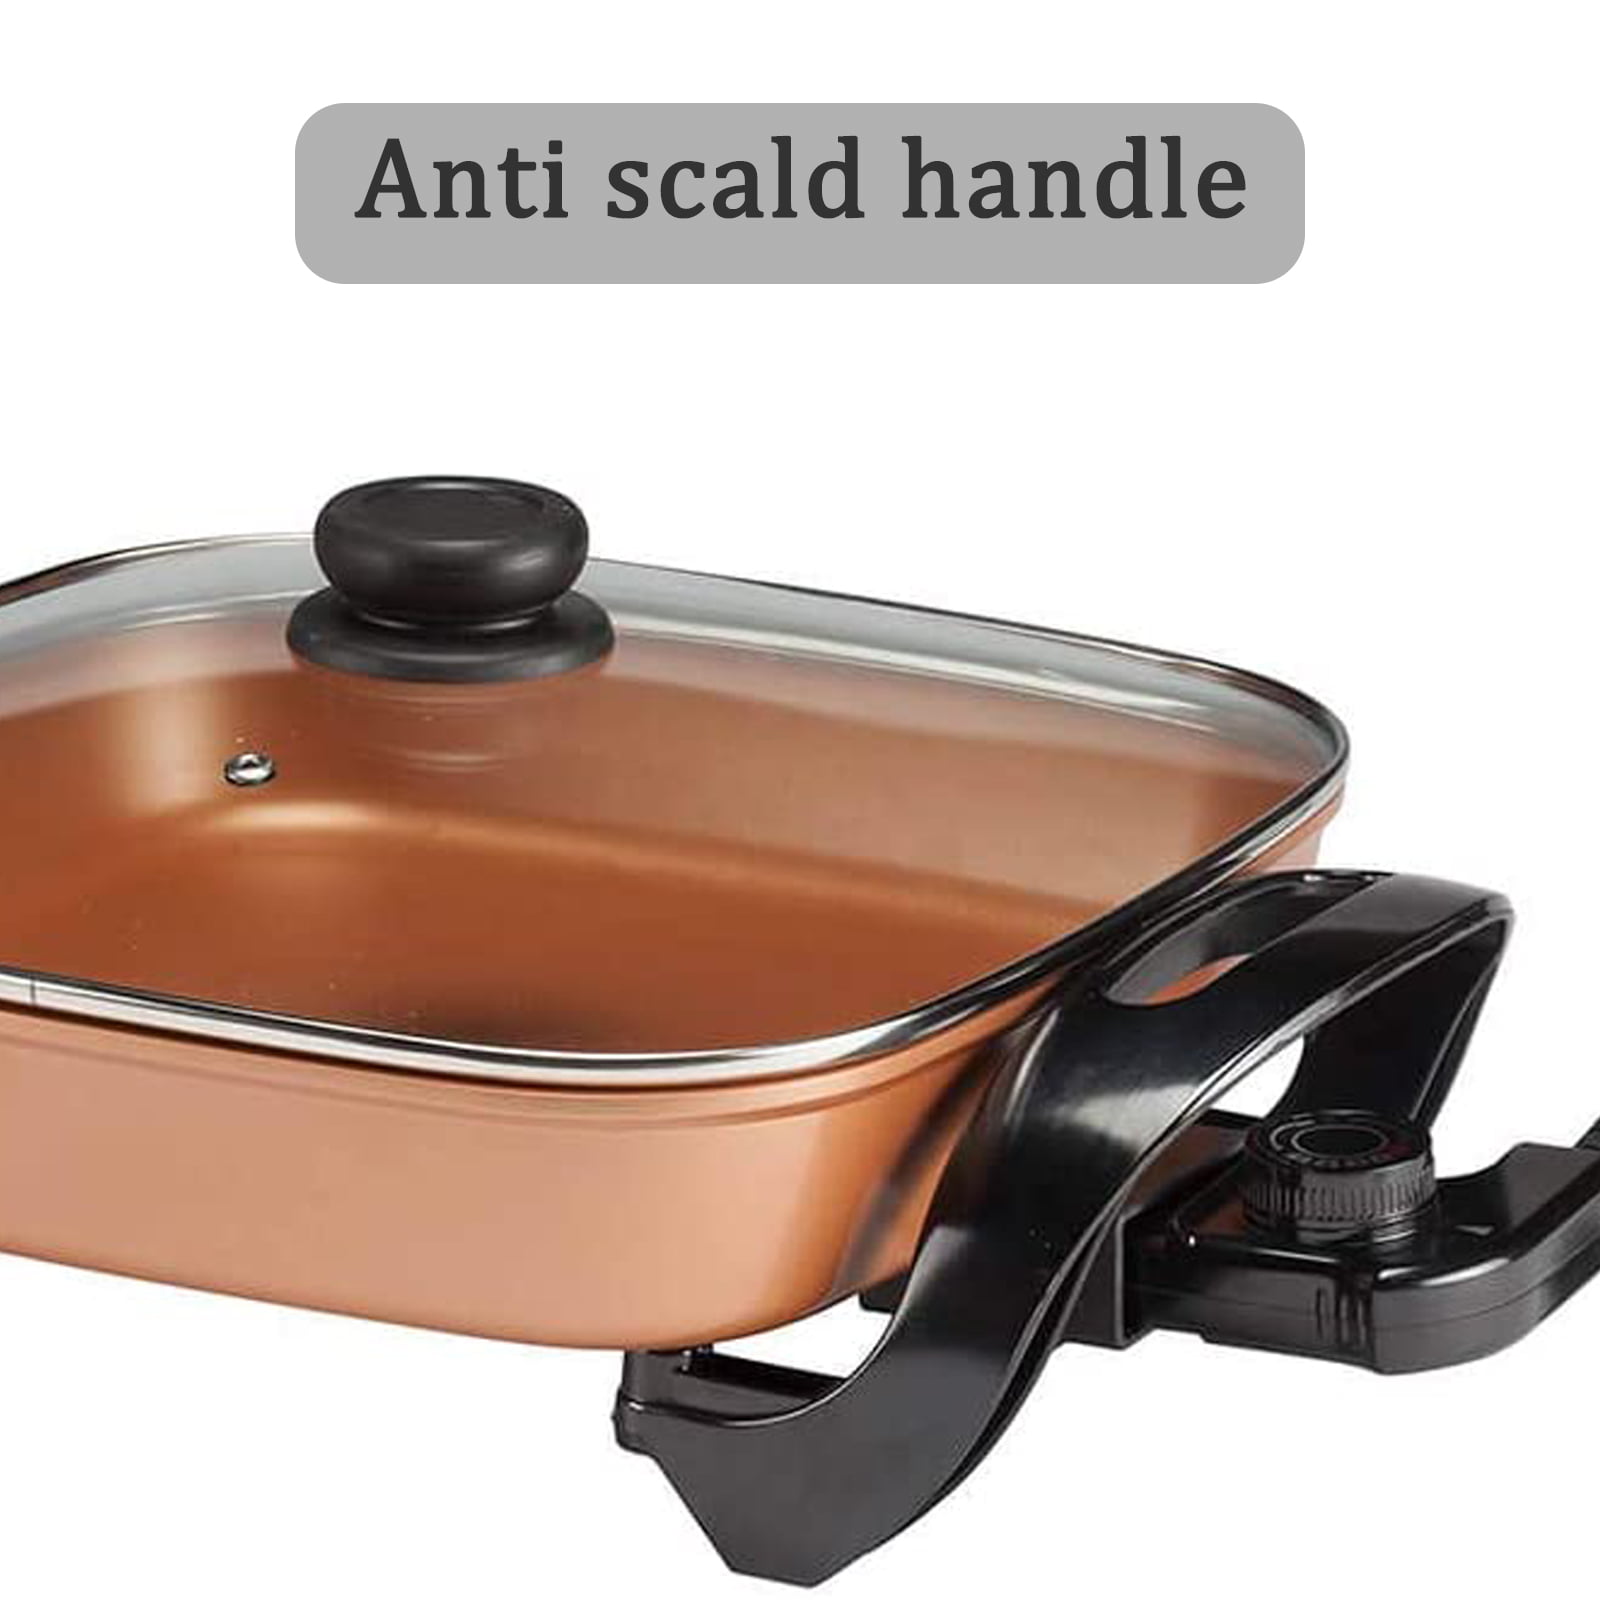 Noel Grimley Electrics - Tower T14036COP Cerasure Copper Multifunctional Electric  Skillet with Adjustable Temperature Control and Glass Lid 1500W